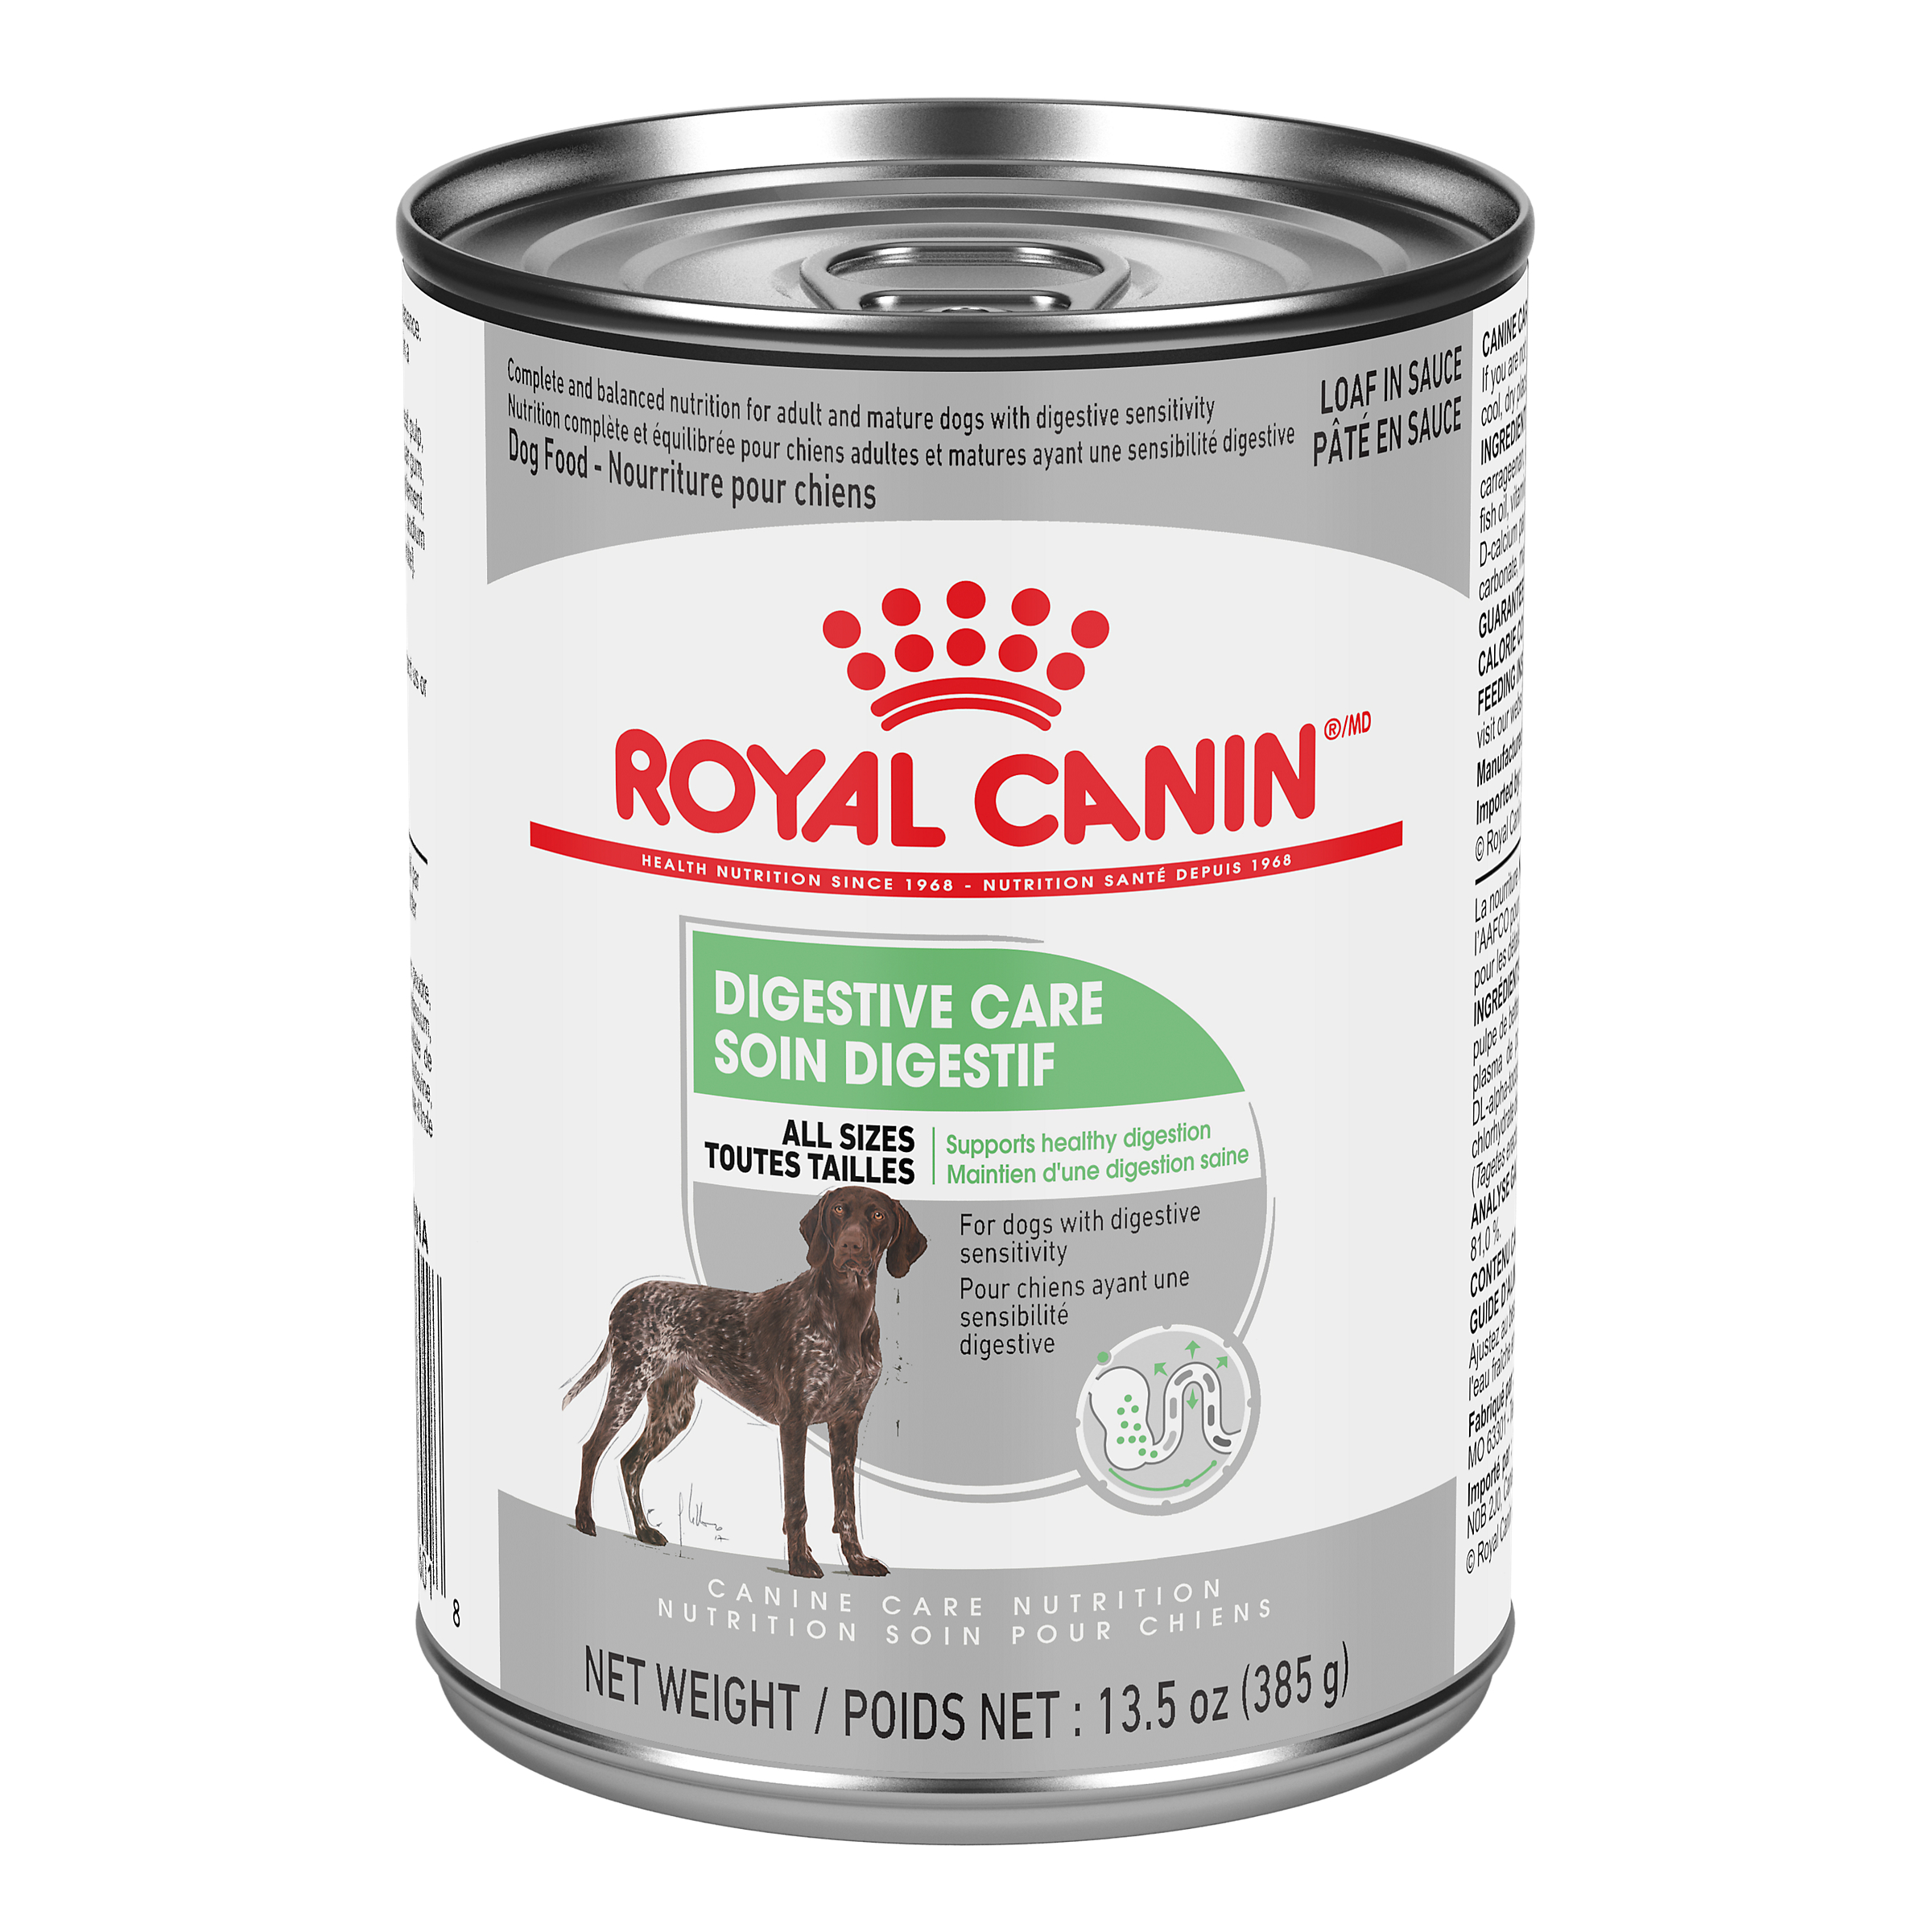 Digestive Care Canned Dog Food Royal Canin